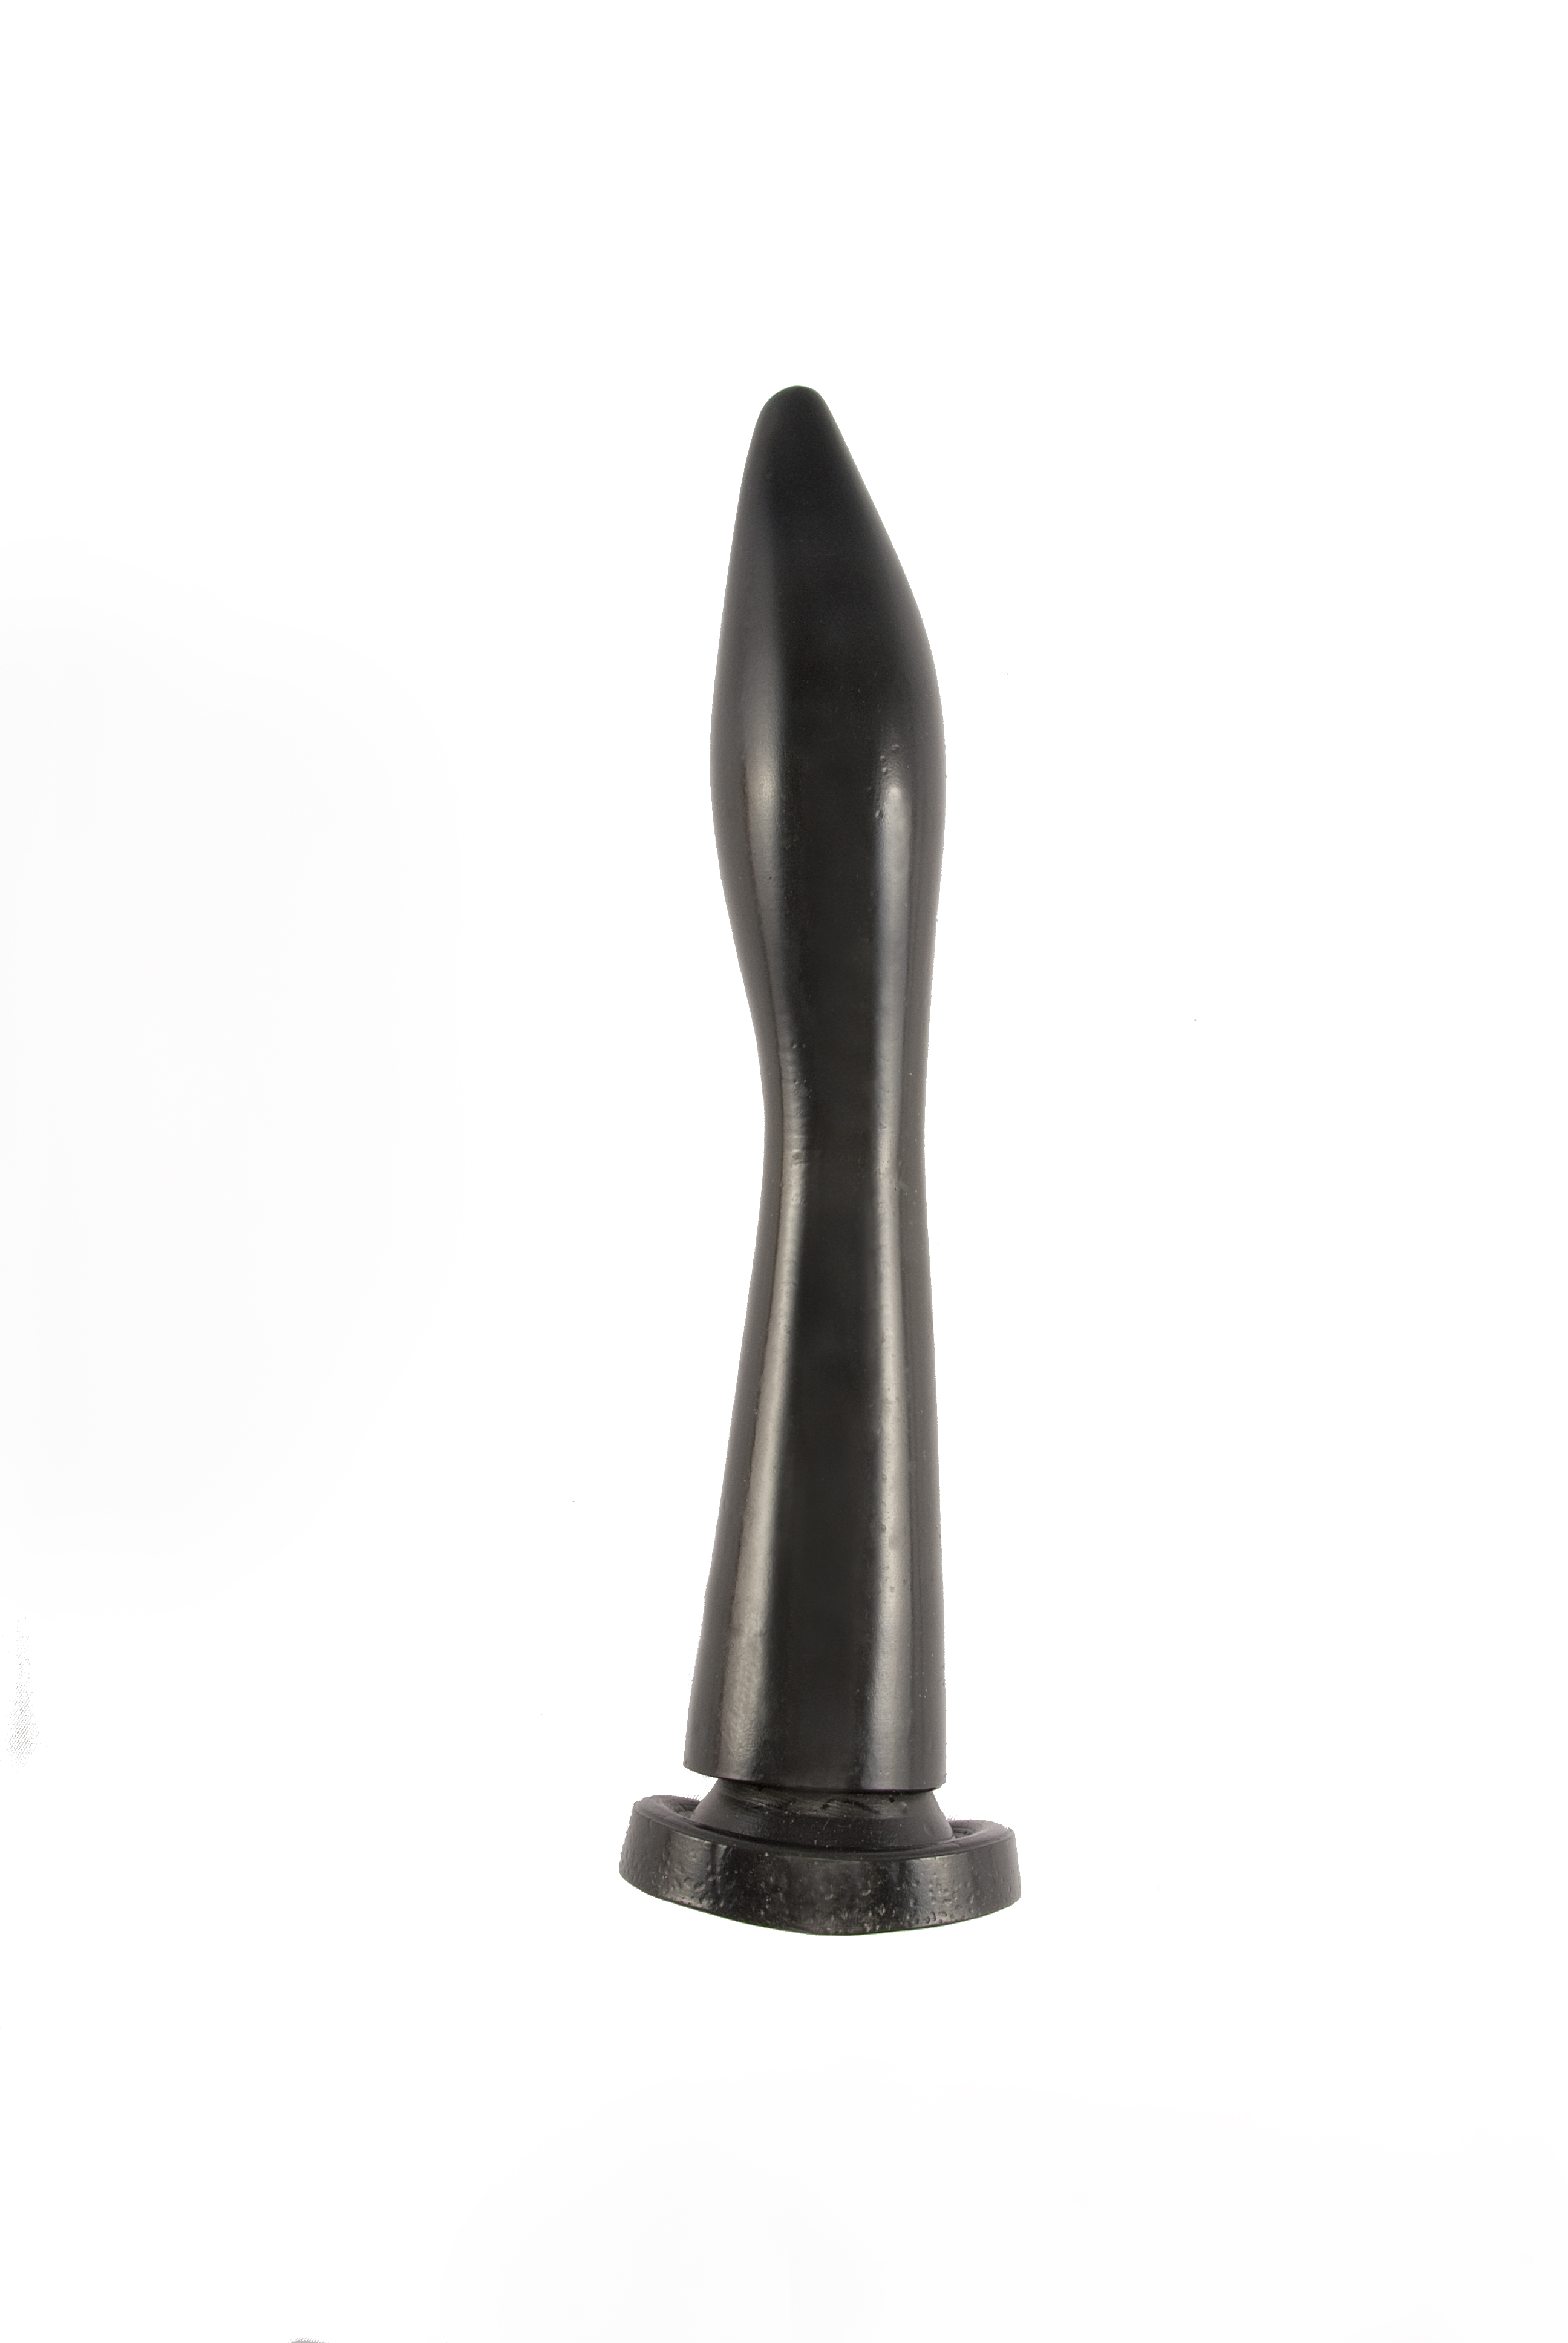 Goose with Suction Small Black Probe 